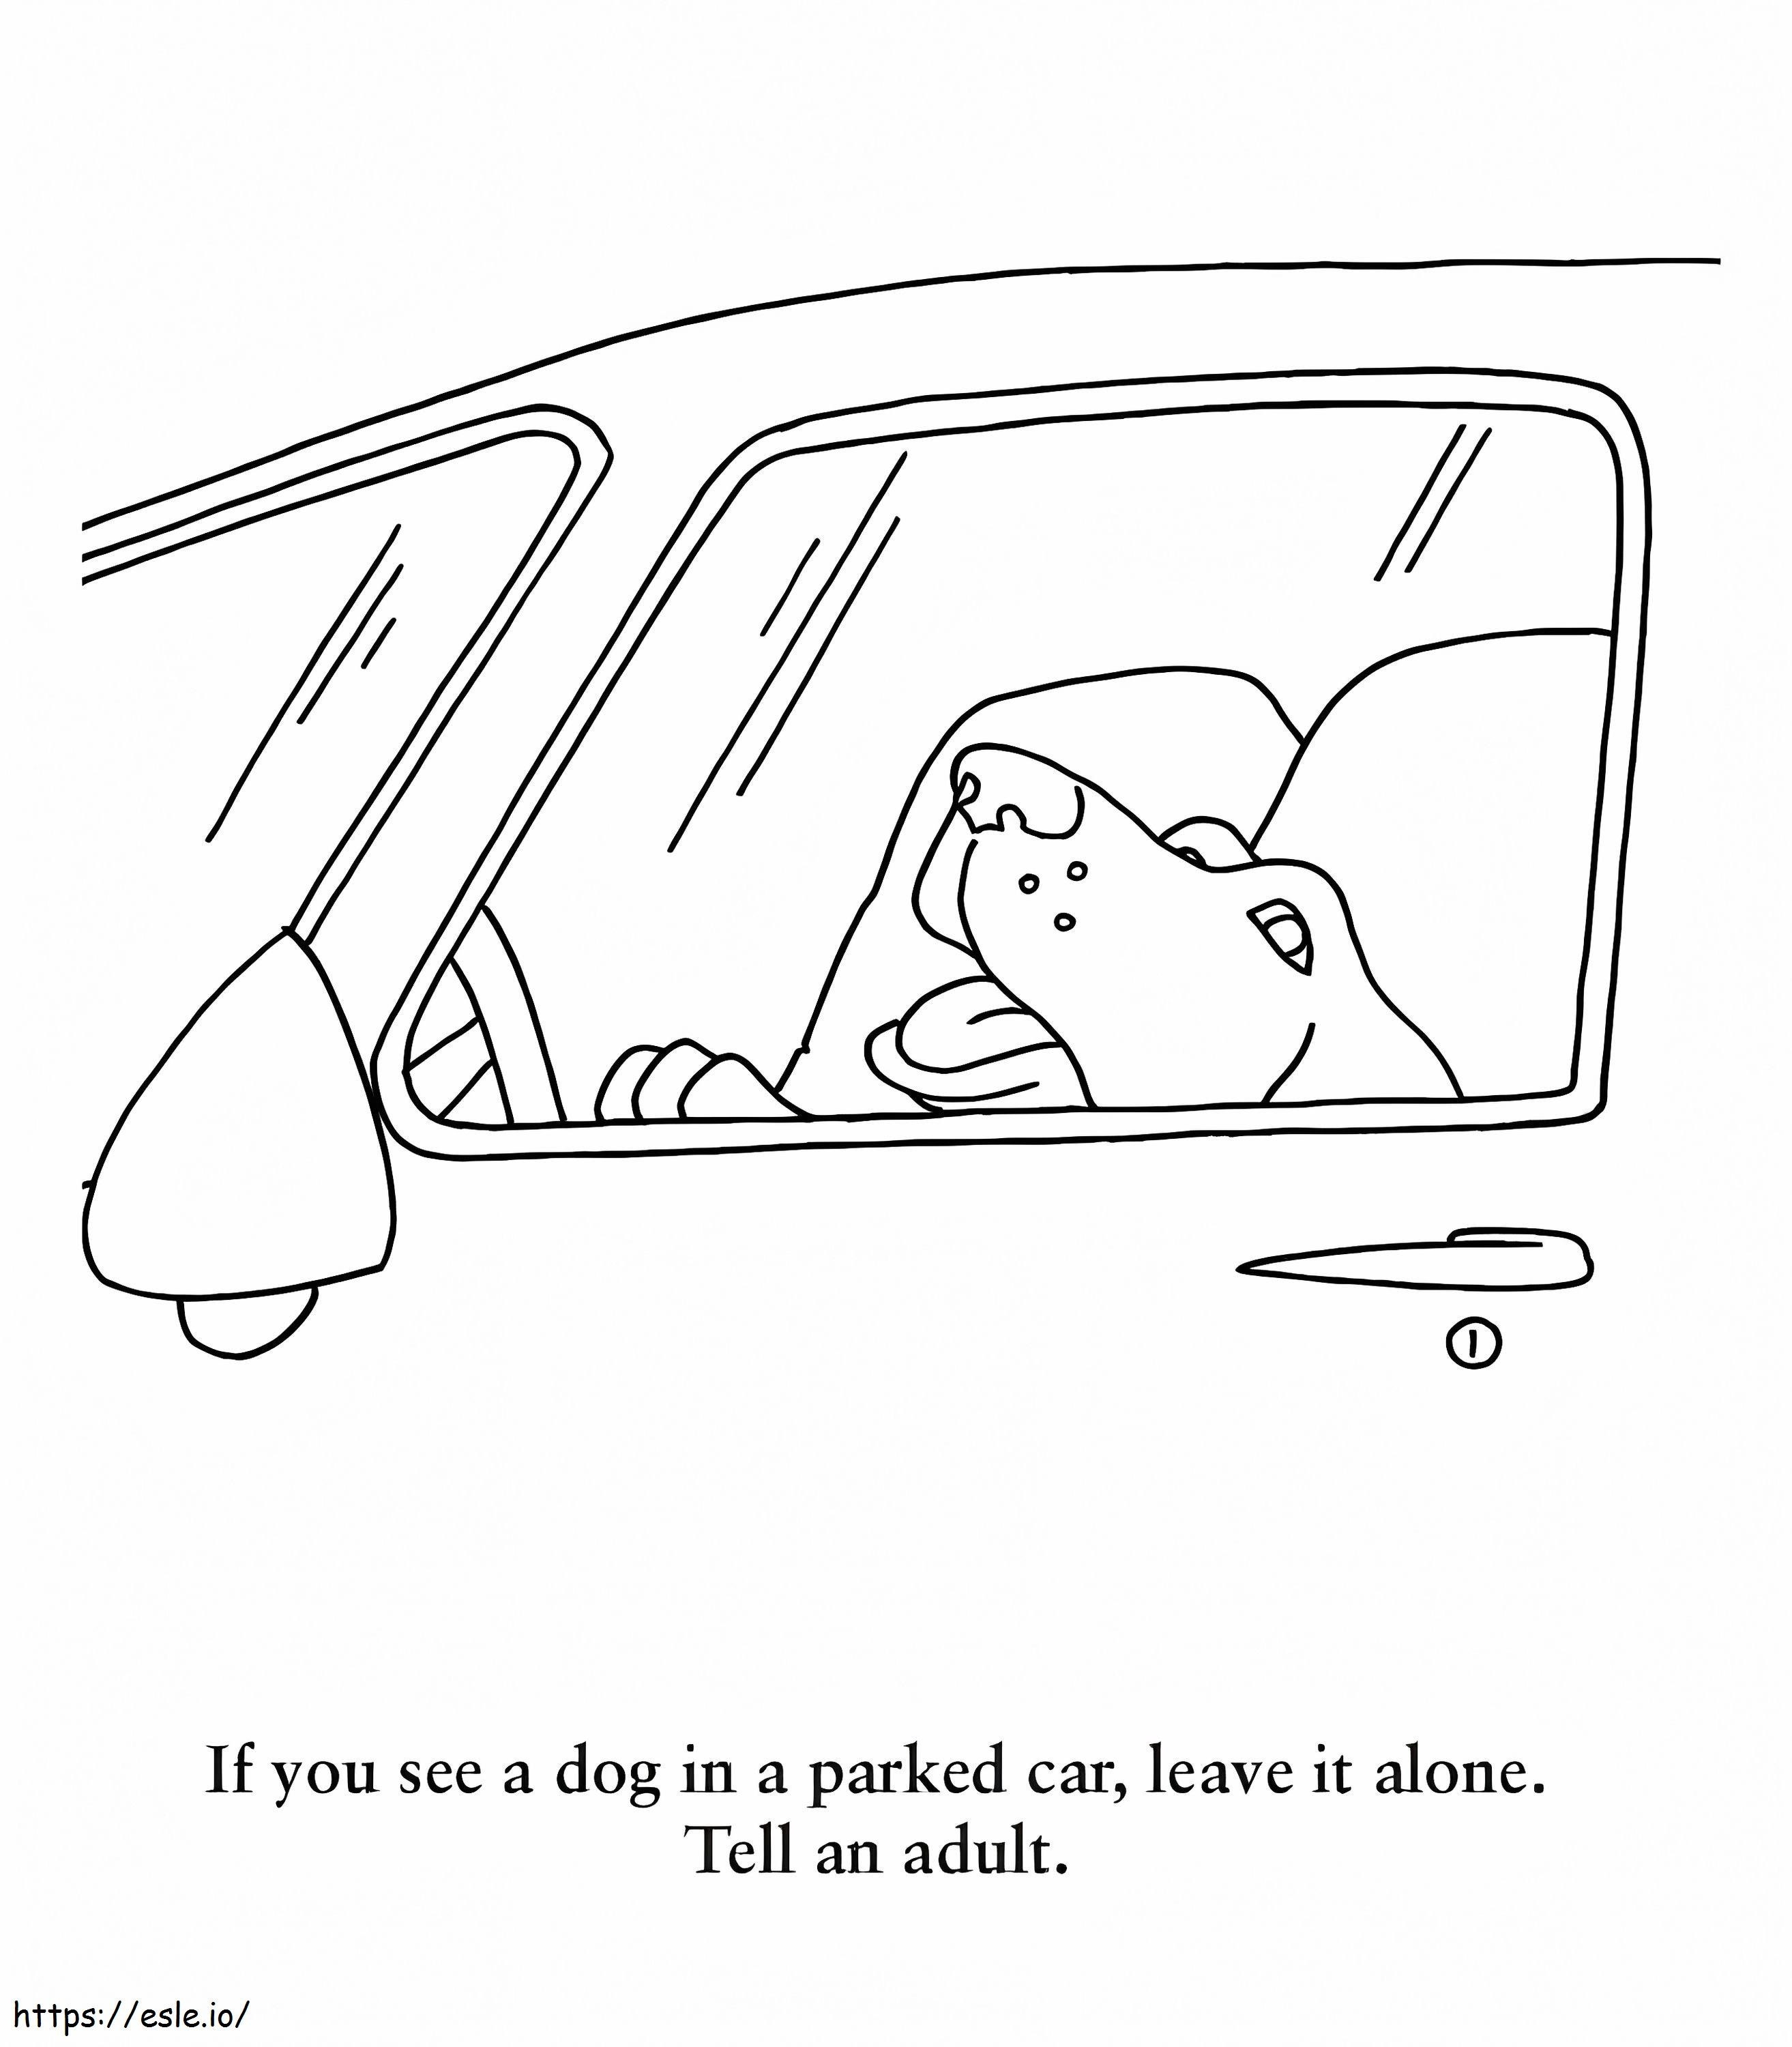 Dog Safety For Children coloring page